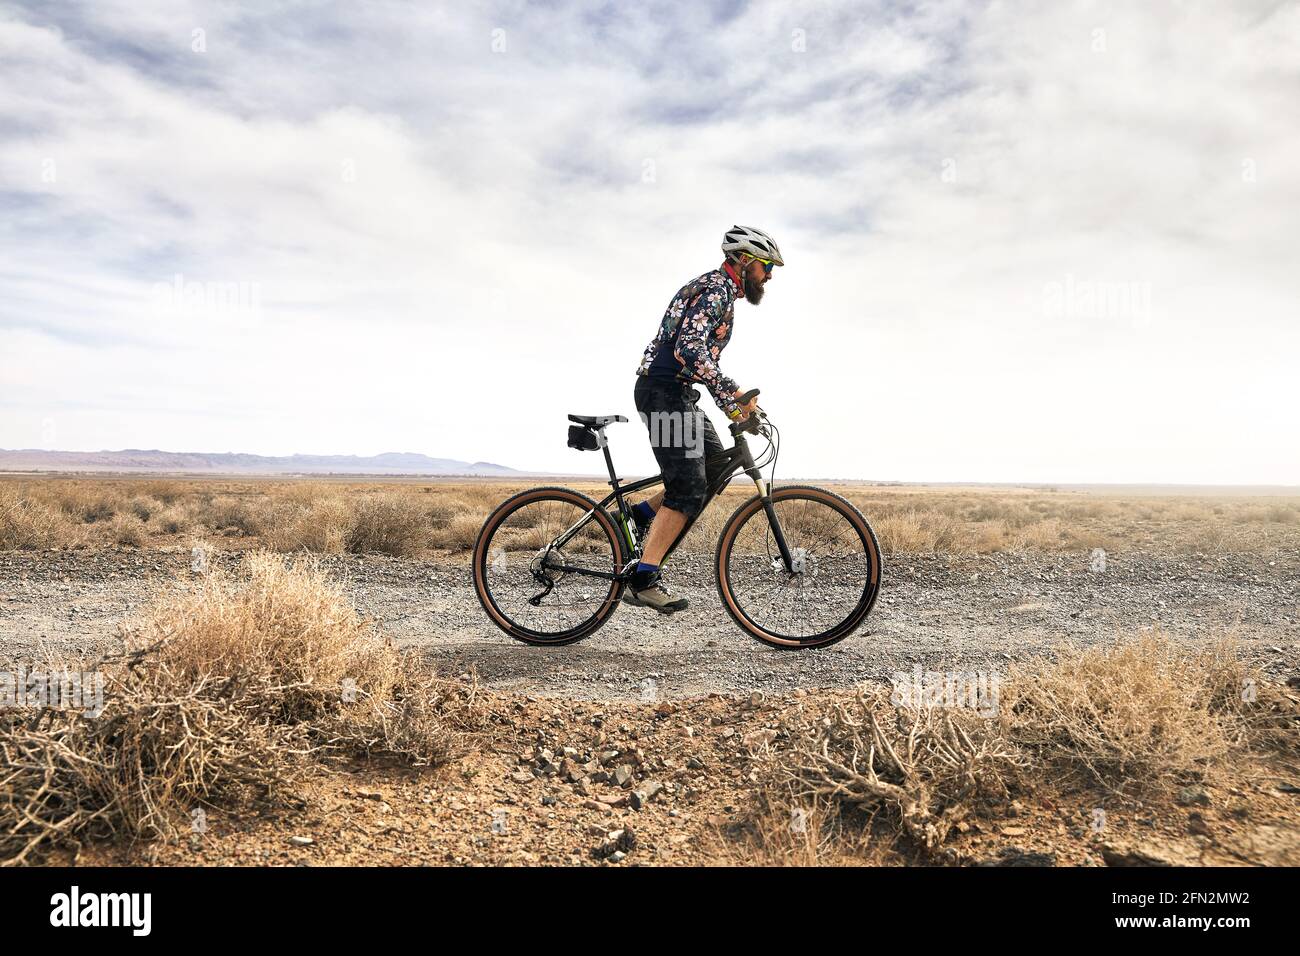 Rider with beard rides his mountain bike in the desert road at sunny weather in Kazakhstan. Extreme Sport and outdoor recreation concept. Stock Photo